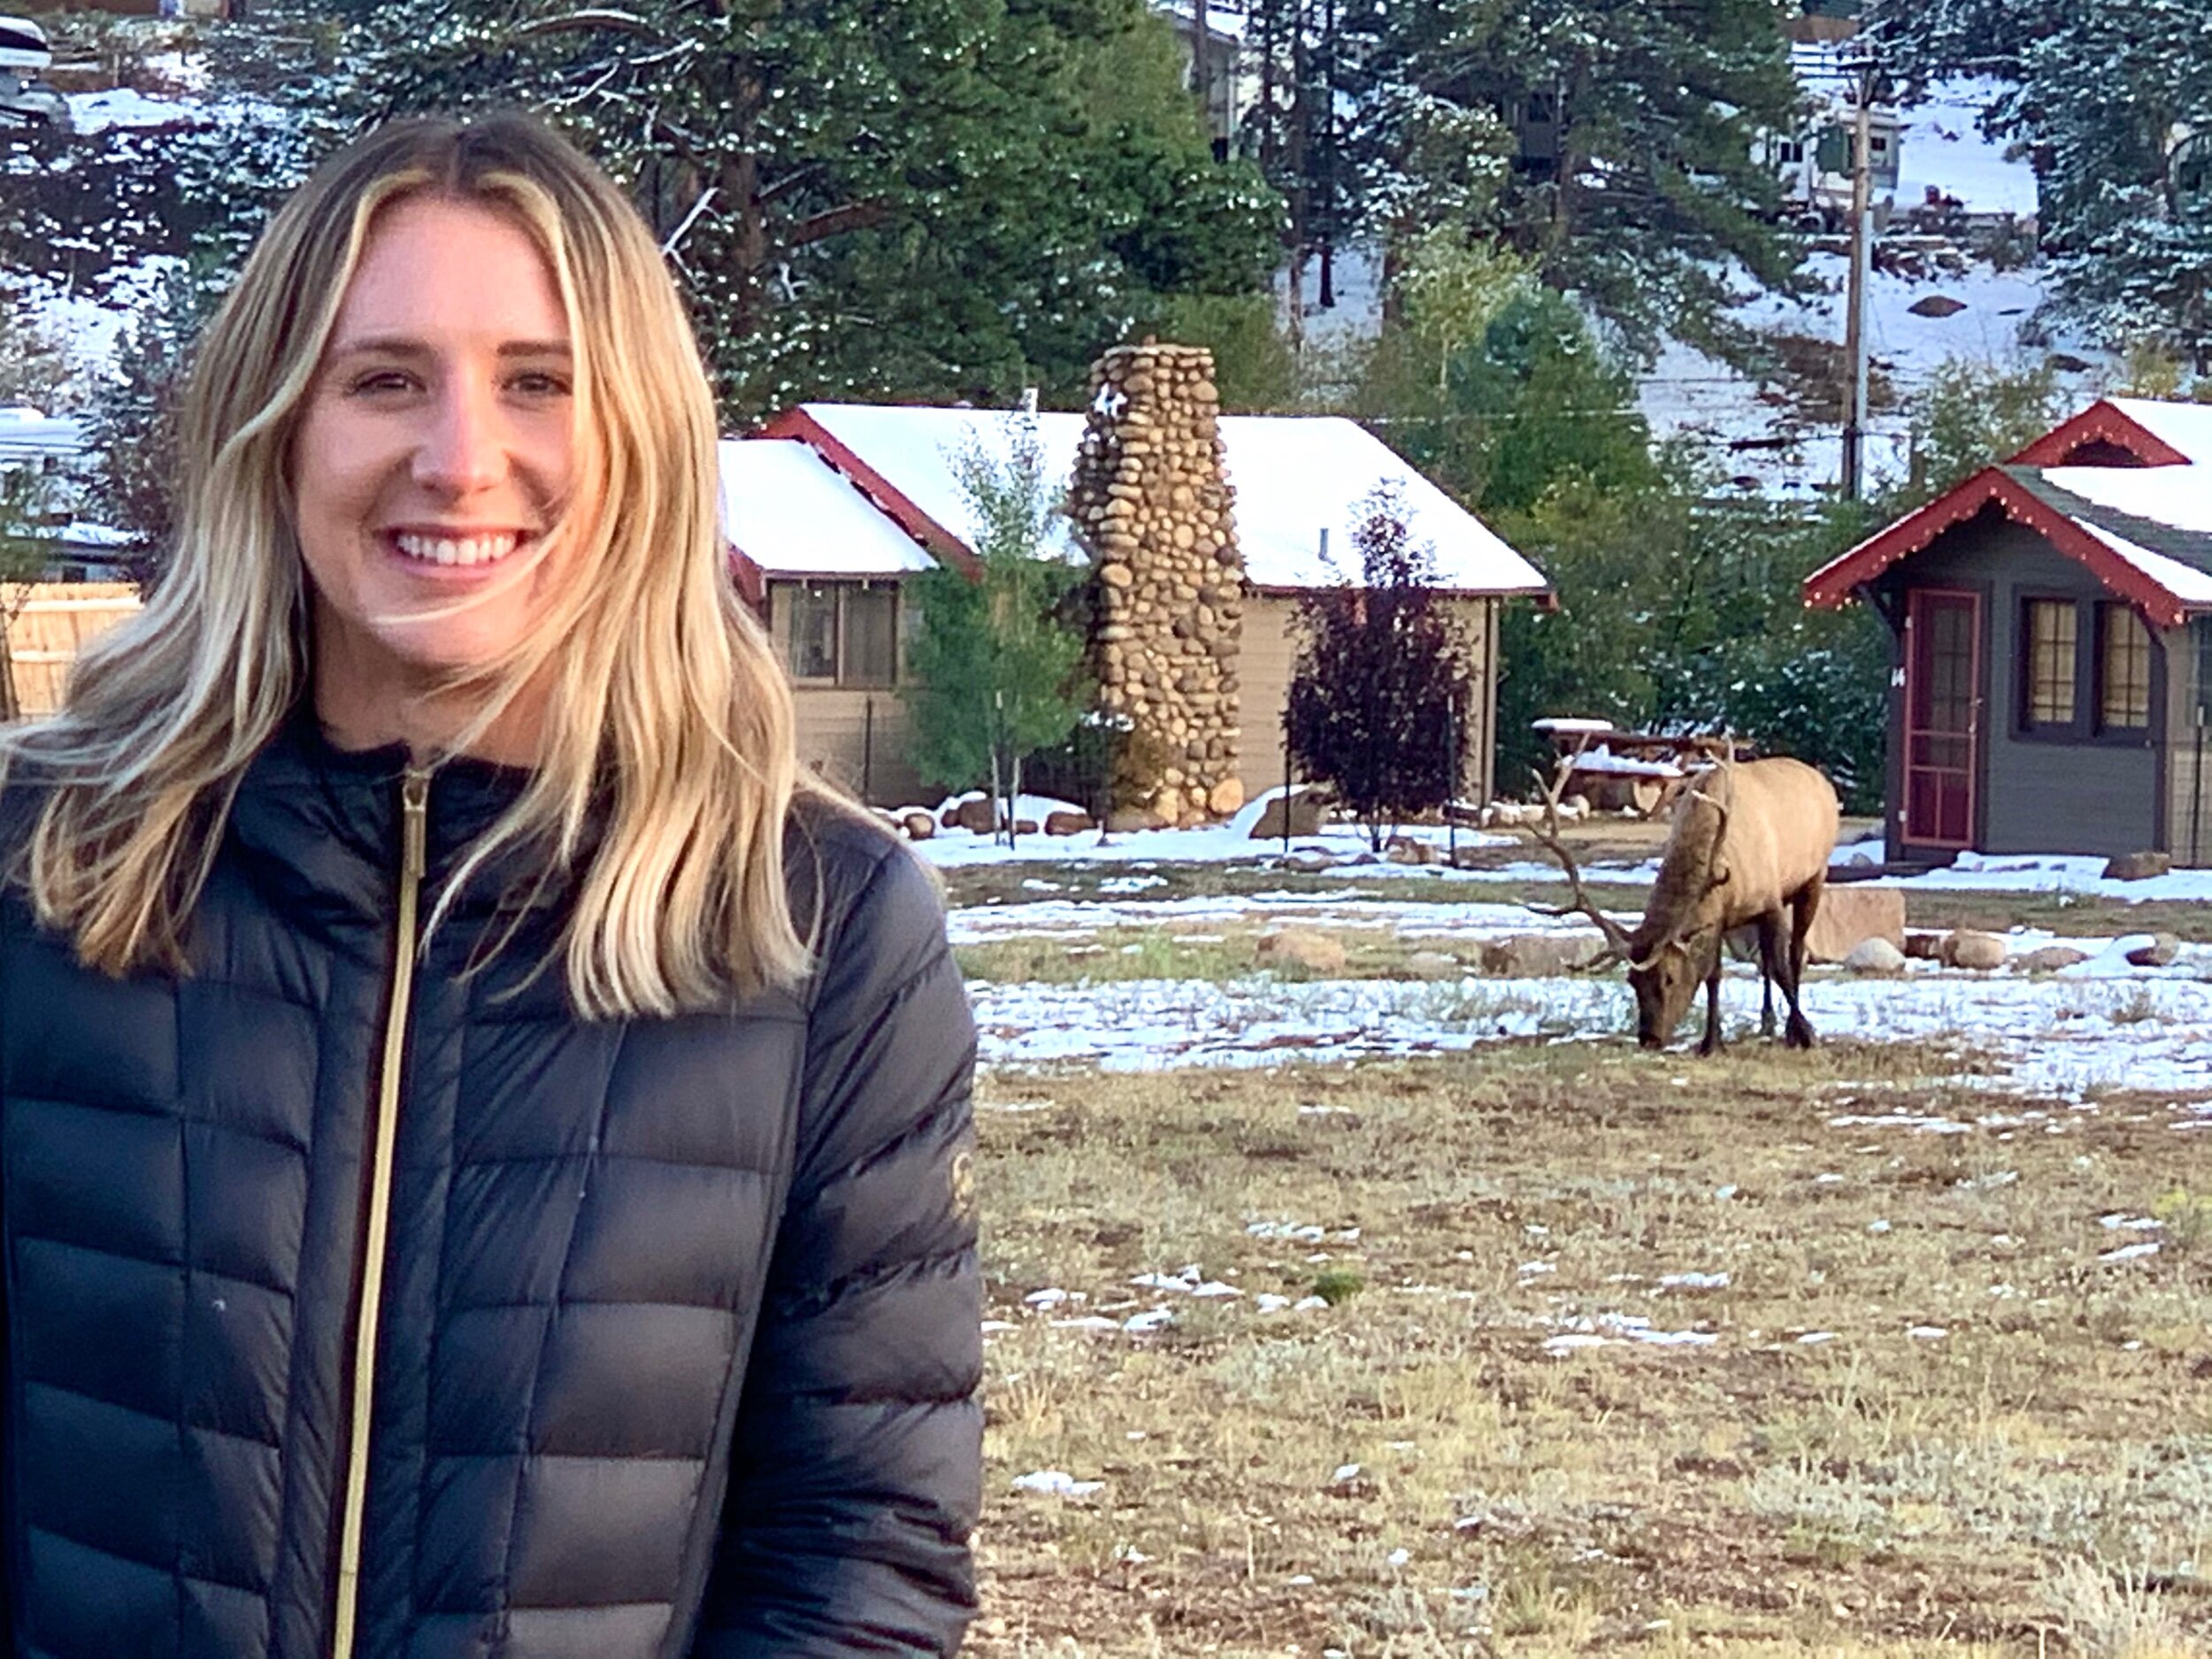  Rachel gets a picture with an elk as we wait to be seated at a restaurant. 🦌 